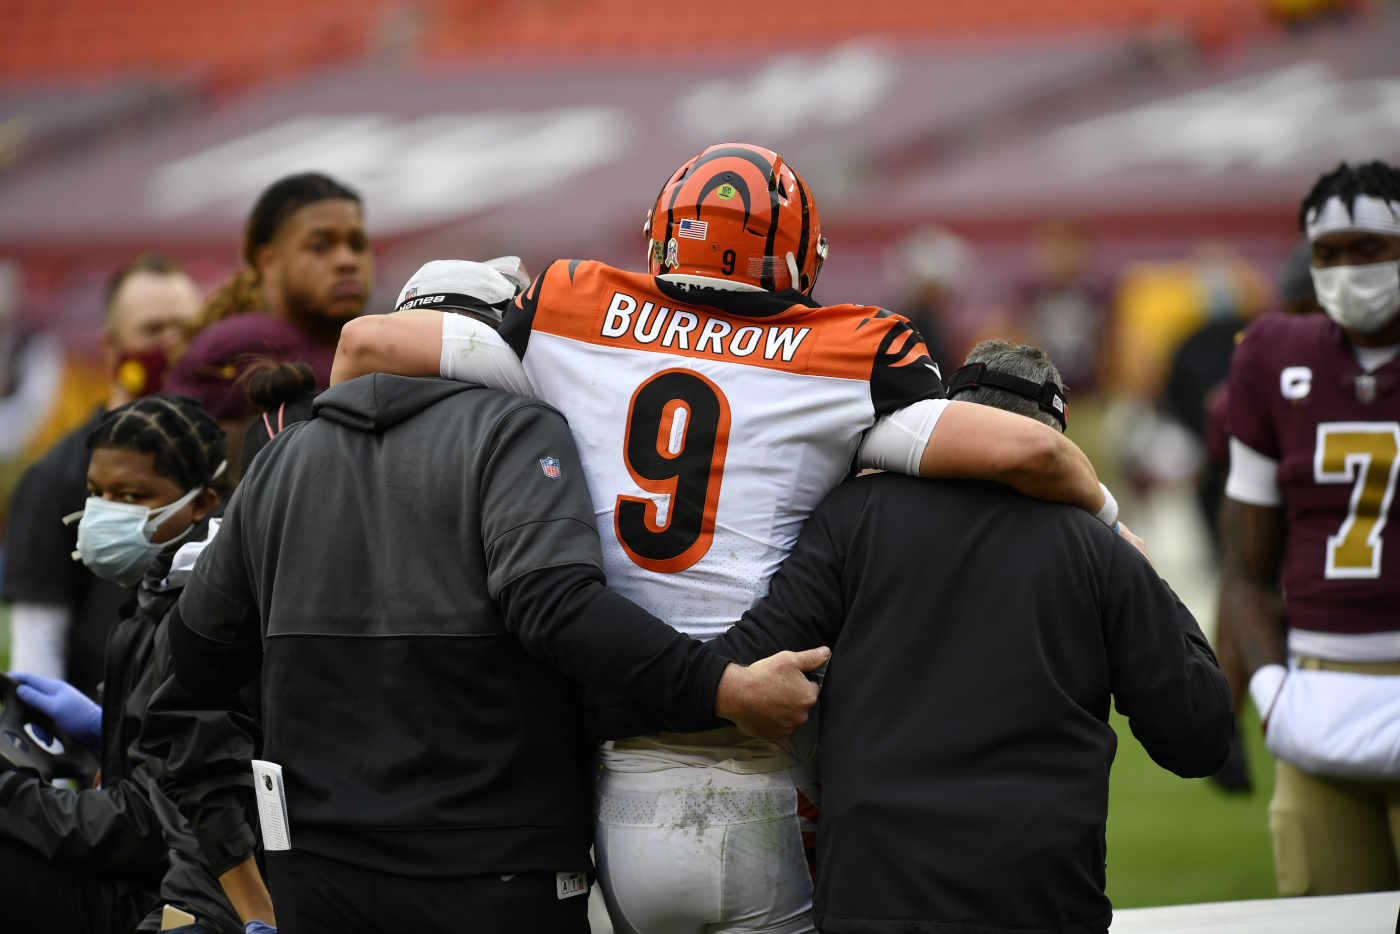 Joe Burrow's rookie year appears to be over after he recently suffered a brutal injury. He can blame it all on the Cincinnati Bengals, too.